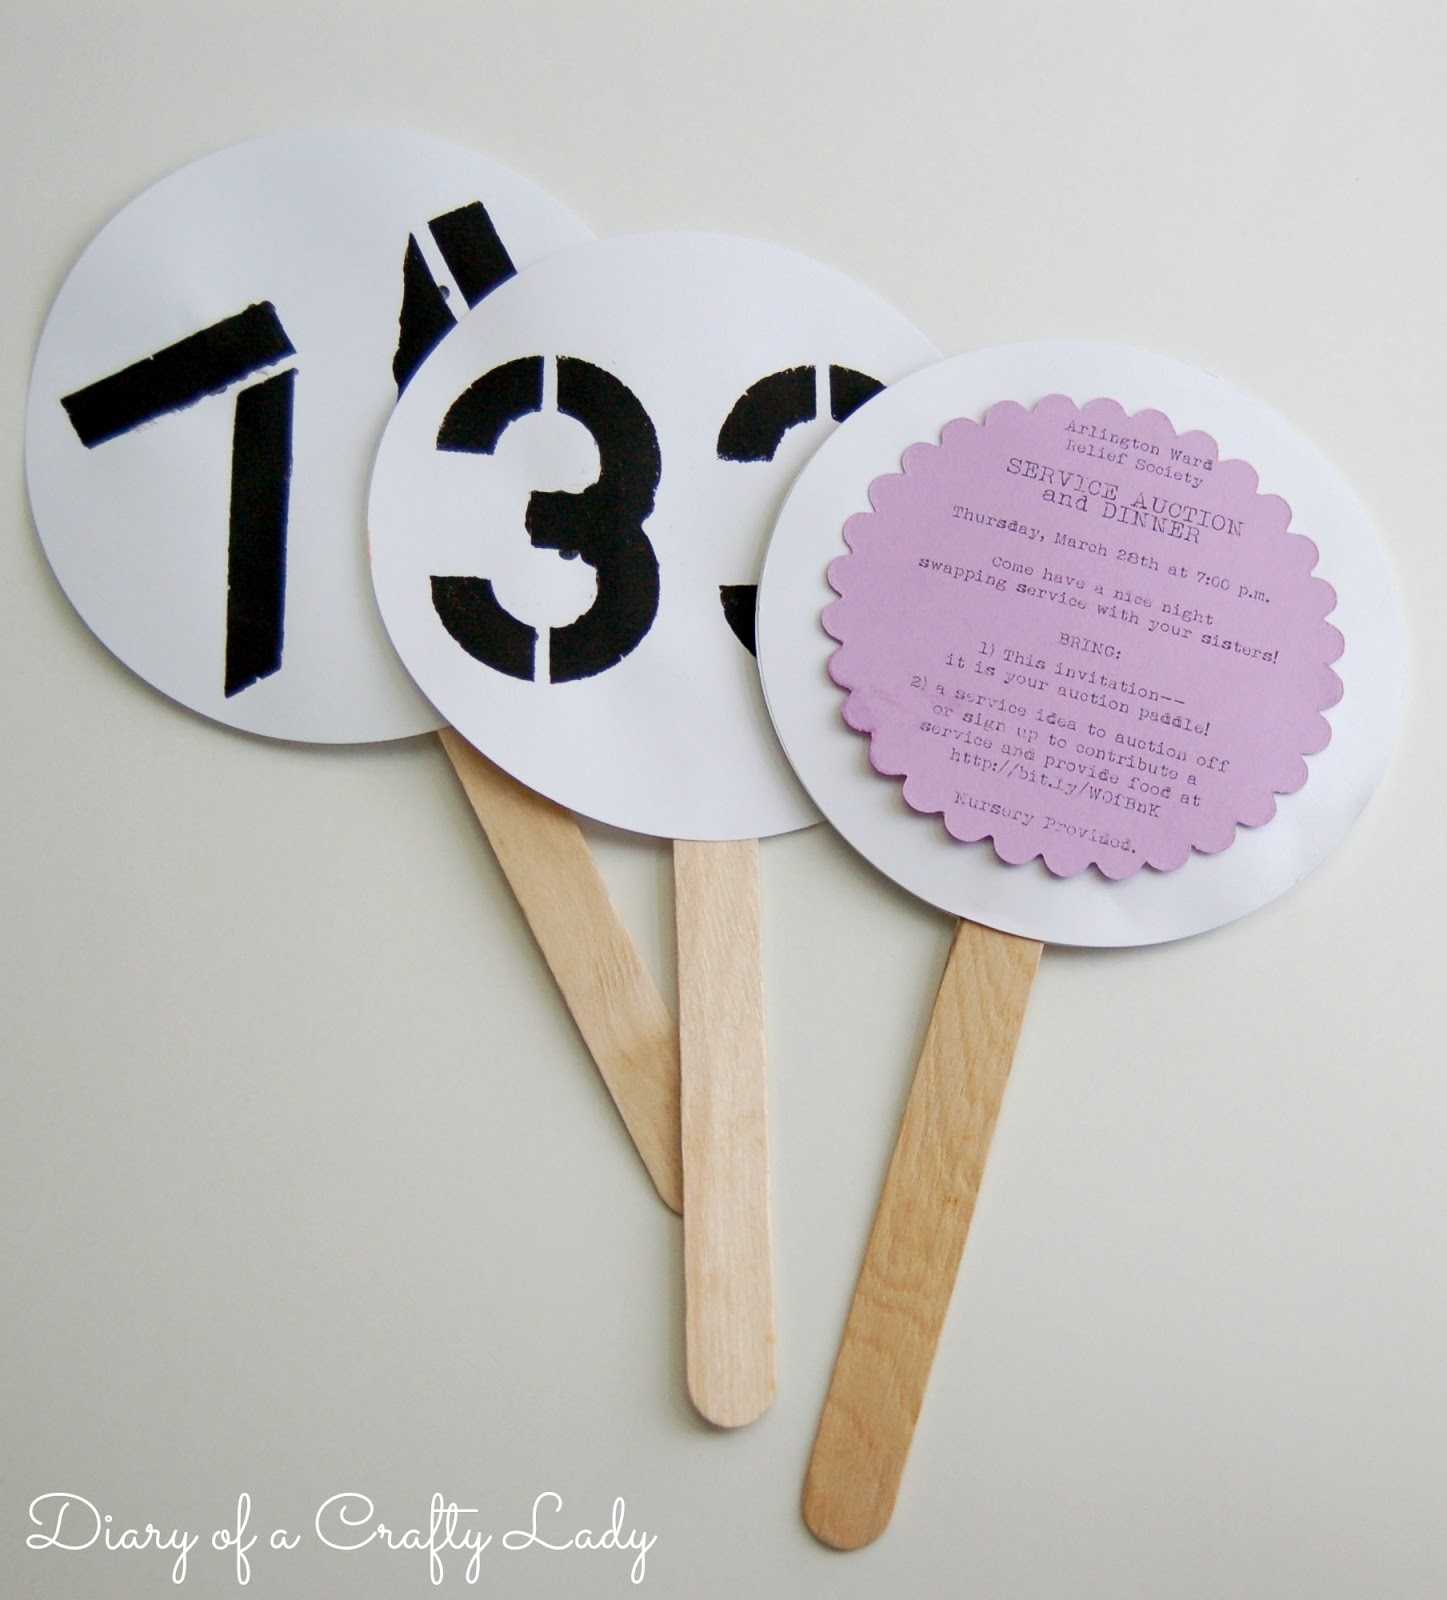 Free Bid Paddle Cliparts, Download Free Clip Art, Free Clip Intended For Auction Bid Cards Template